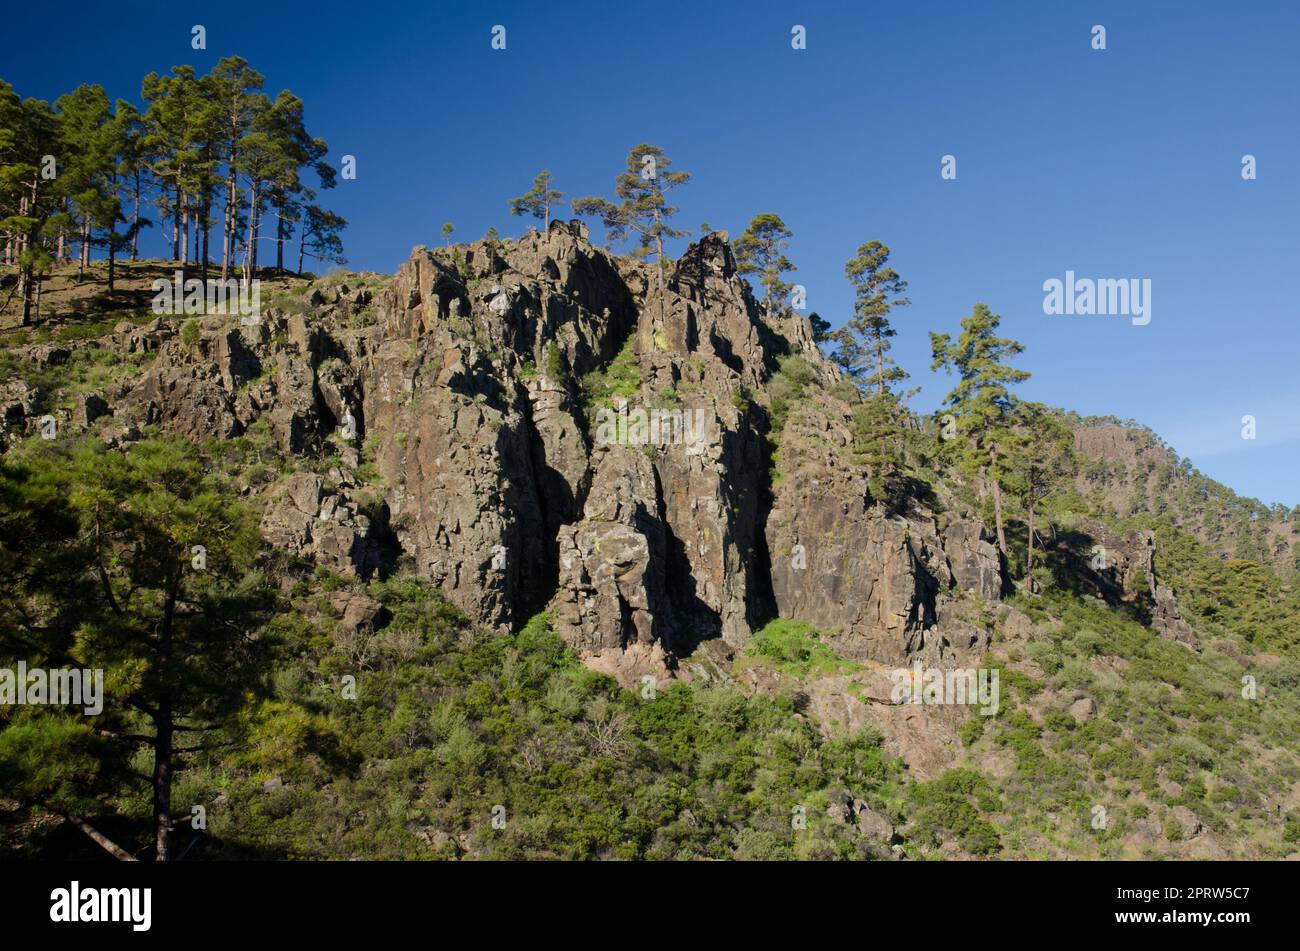 Cliff in the Integral Natural Reserve of Inagua. Stock Photo